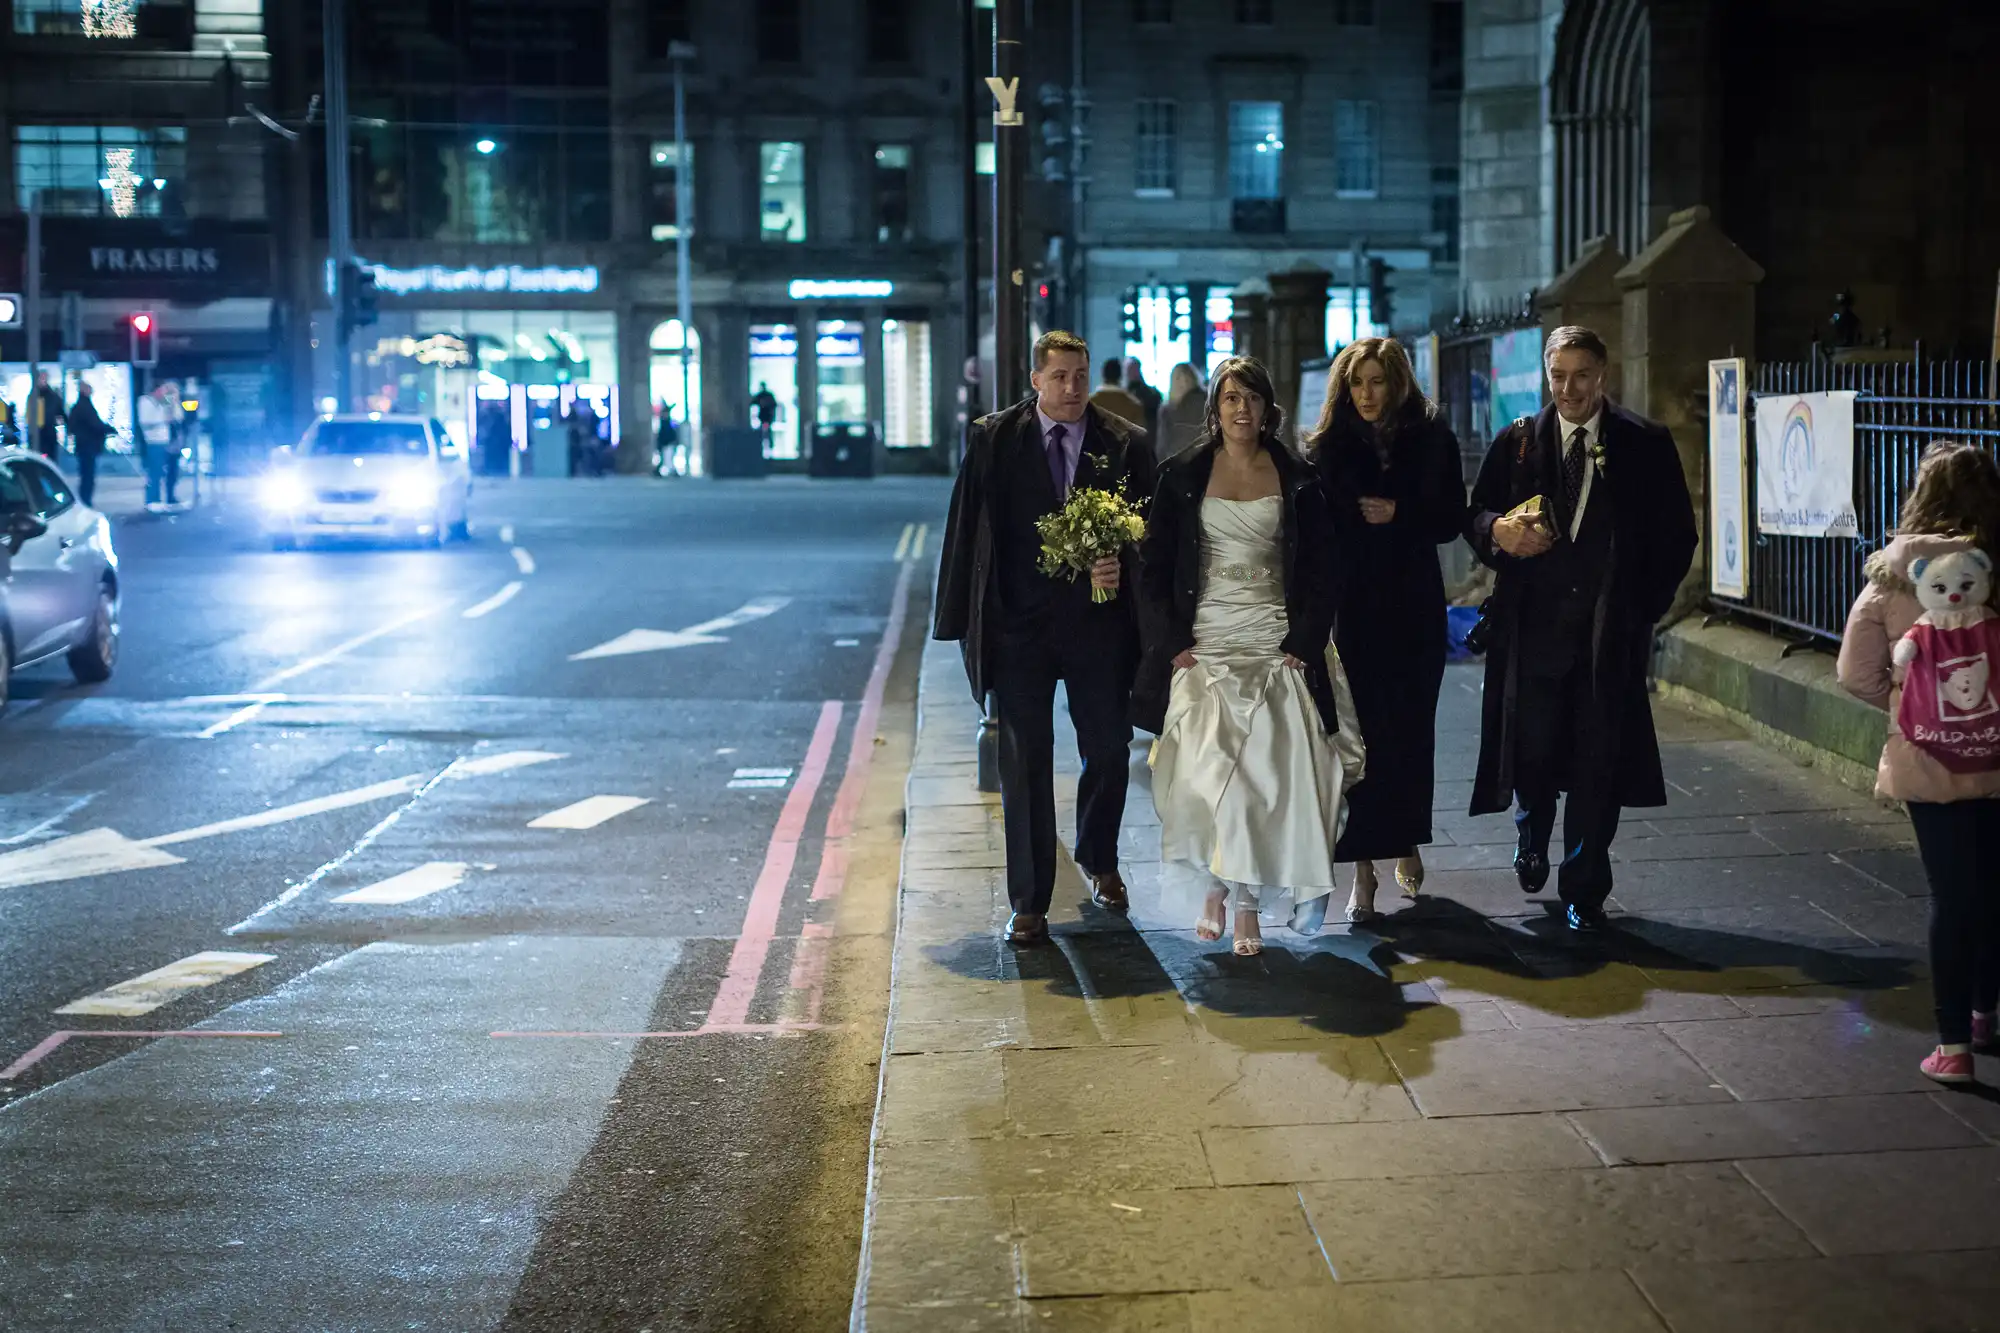 A wedding party walking along a city street at night, with a bride in a white dress, flanked by two men in suits and a woman in black, nearby a lit storefront.